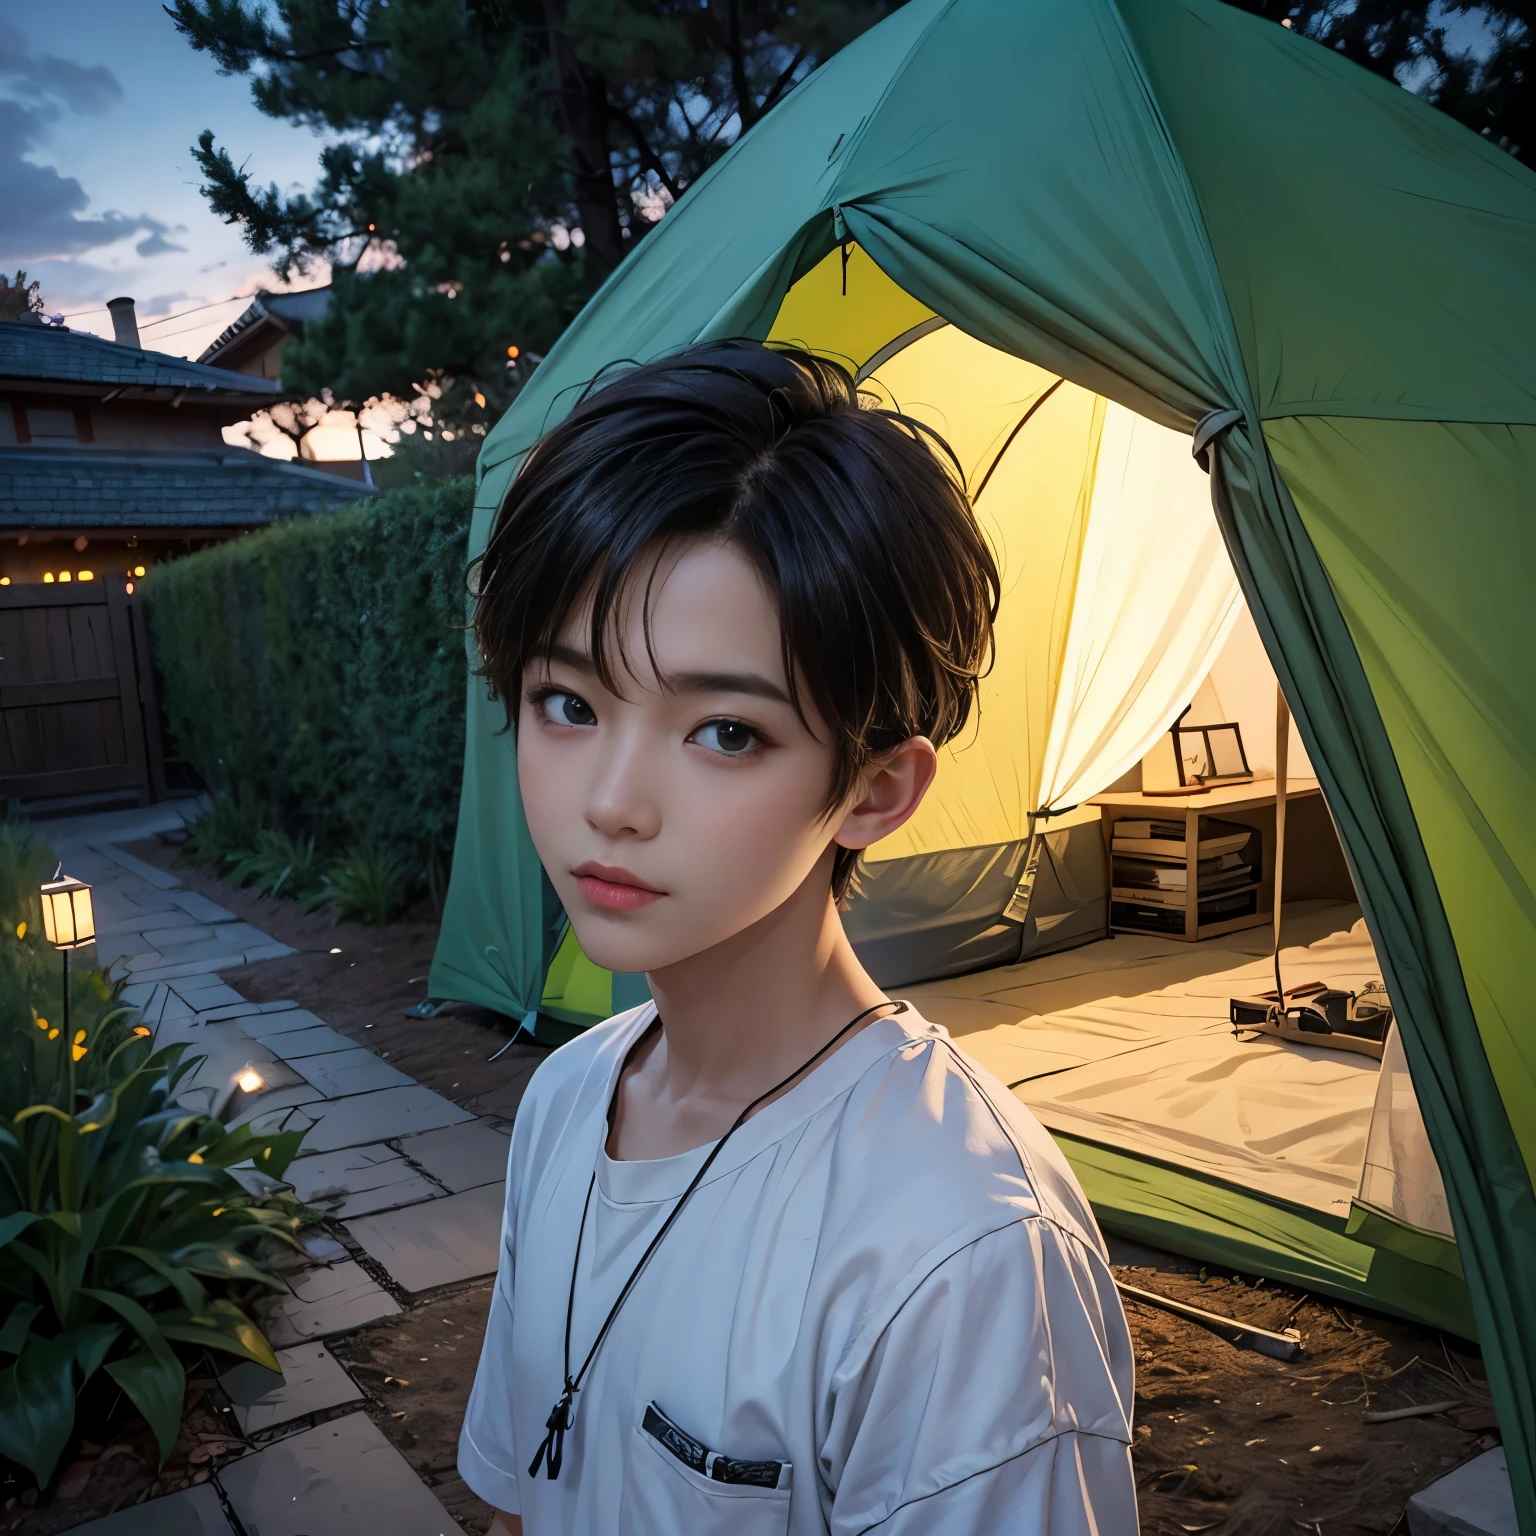 Boy camping in his garden at night、tent、Residential Street、Detailed face、Beautiful Eyes、Detailed clothing、Warm lighting、Cozy atmosphere